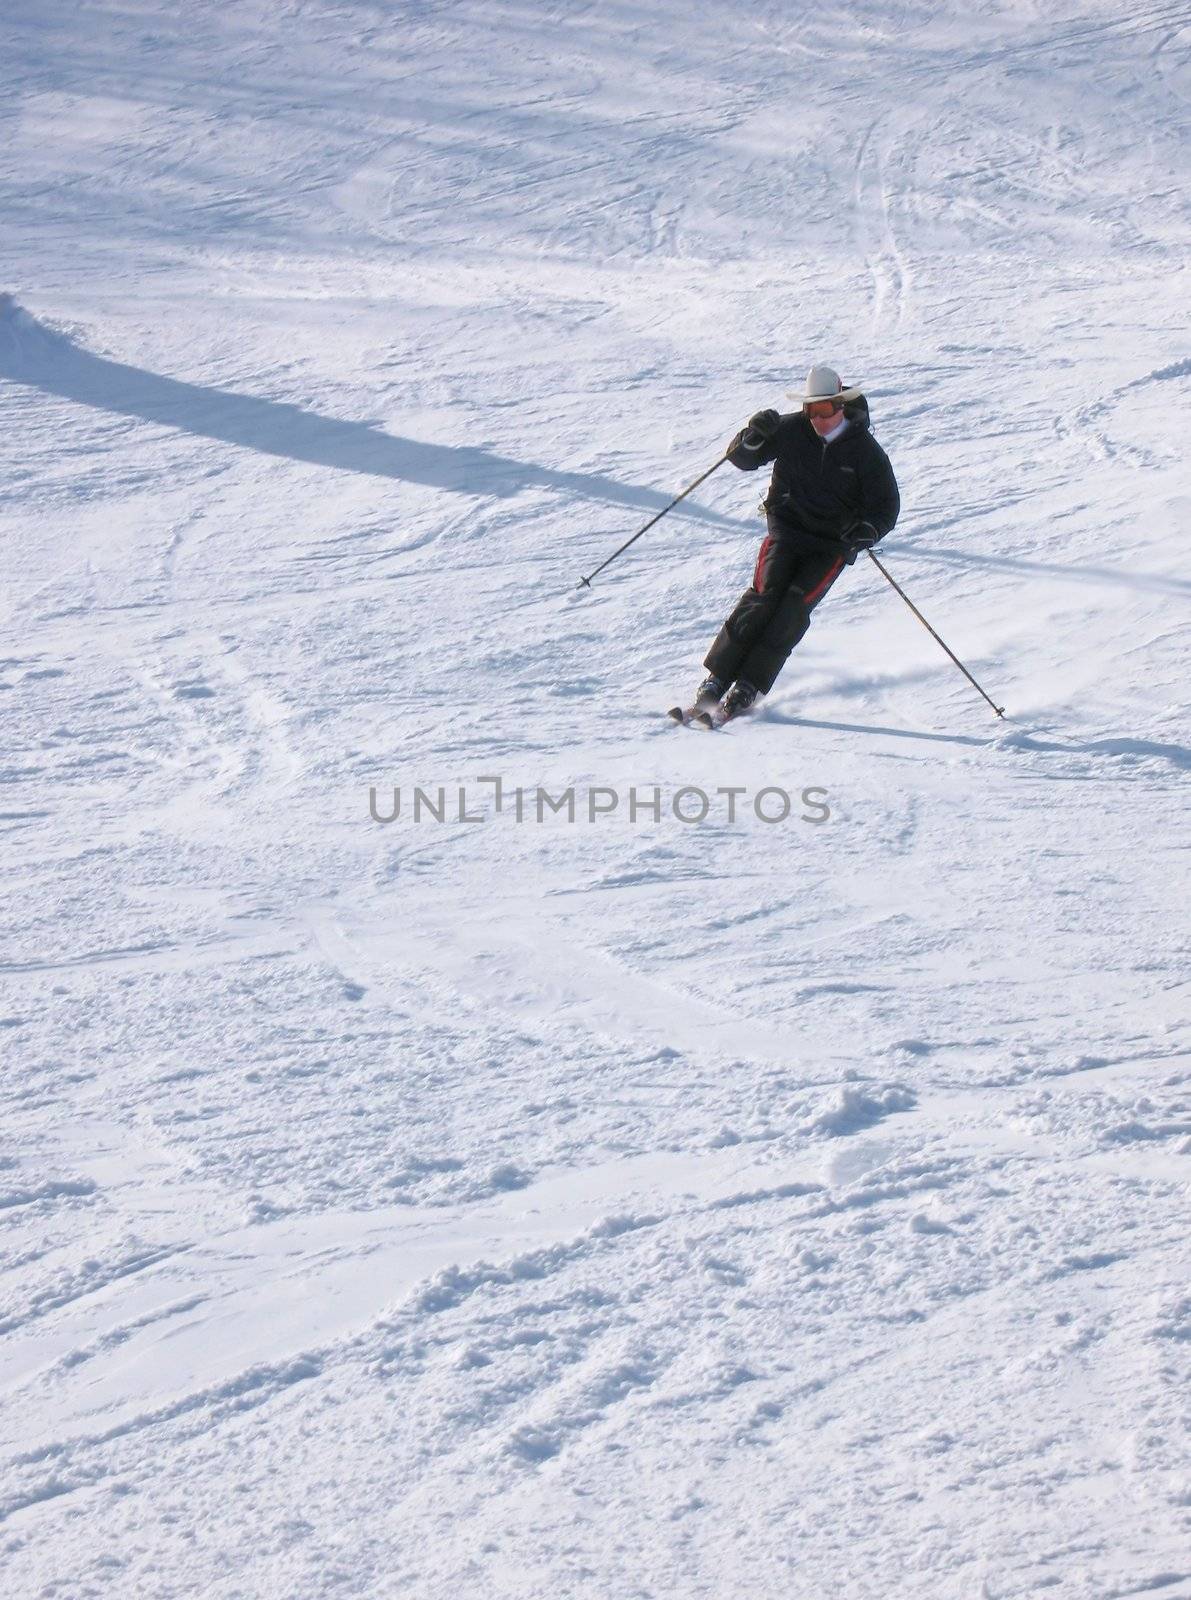 A skier coming down from the mountain, turning into a traverse to change direction, throwing up some snow.